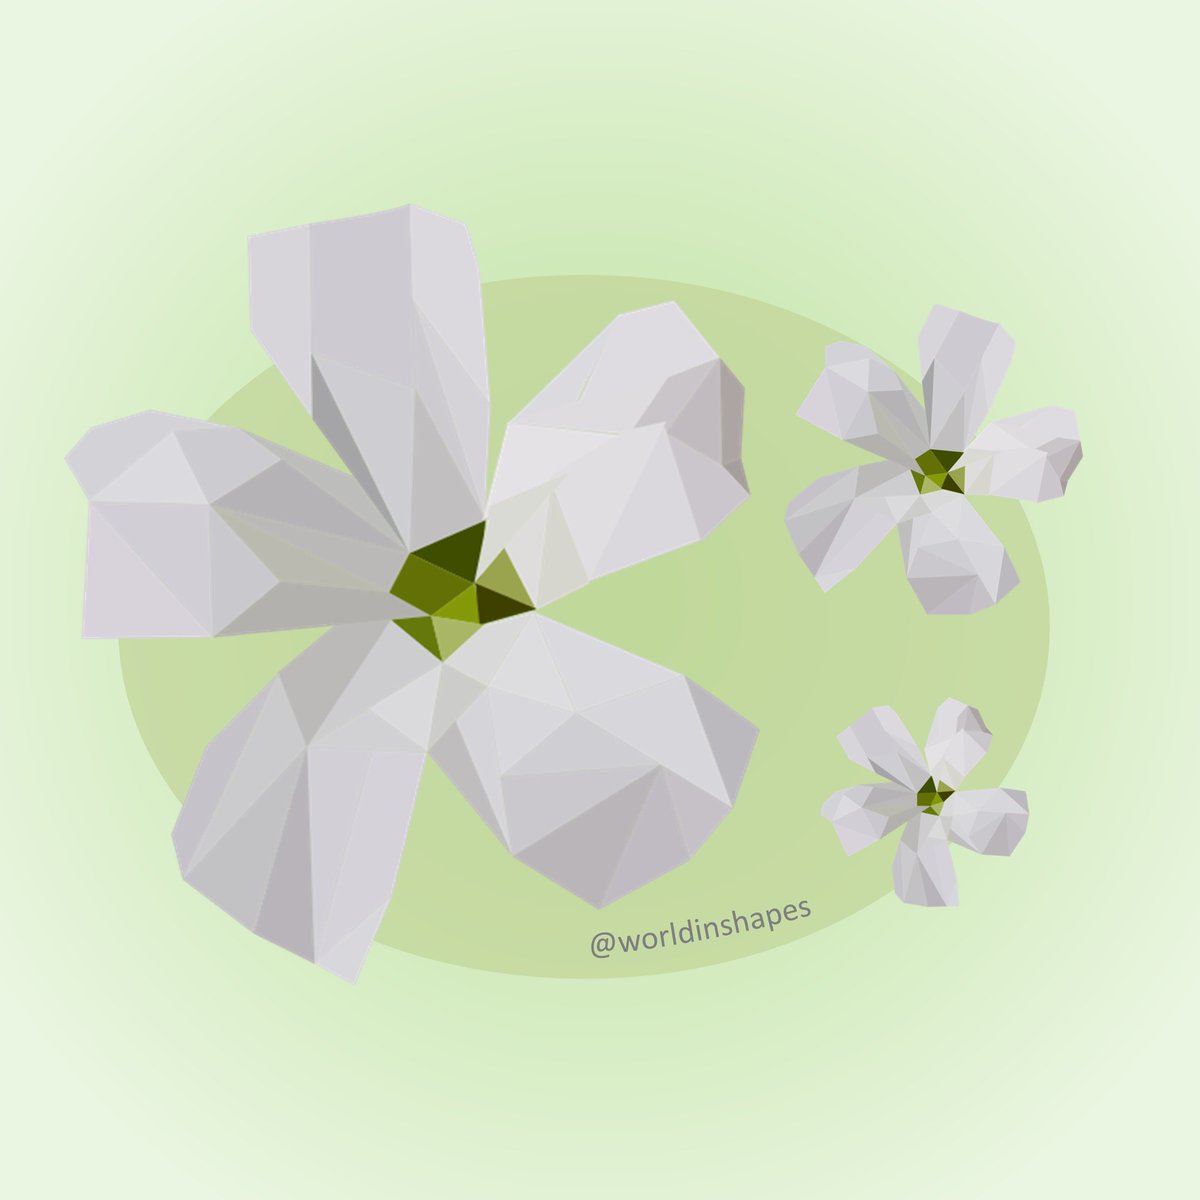 I won't ever get tired of drawing flowers.
But aligning all these shapes in PowerPoint to create a polygonal art is a crazy thing to do!

#ArtPh #ArtTwitter #ArtShare #ArtistOnTwitter #PptArt #PowerPointArt #PolygonalArt #PolyArt #LowPoly #GeometricArt #flowers